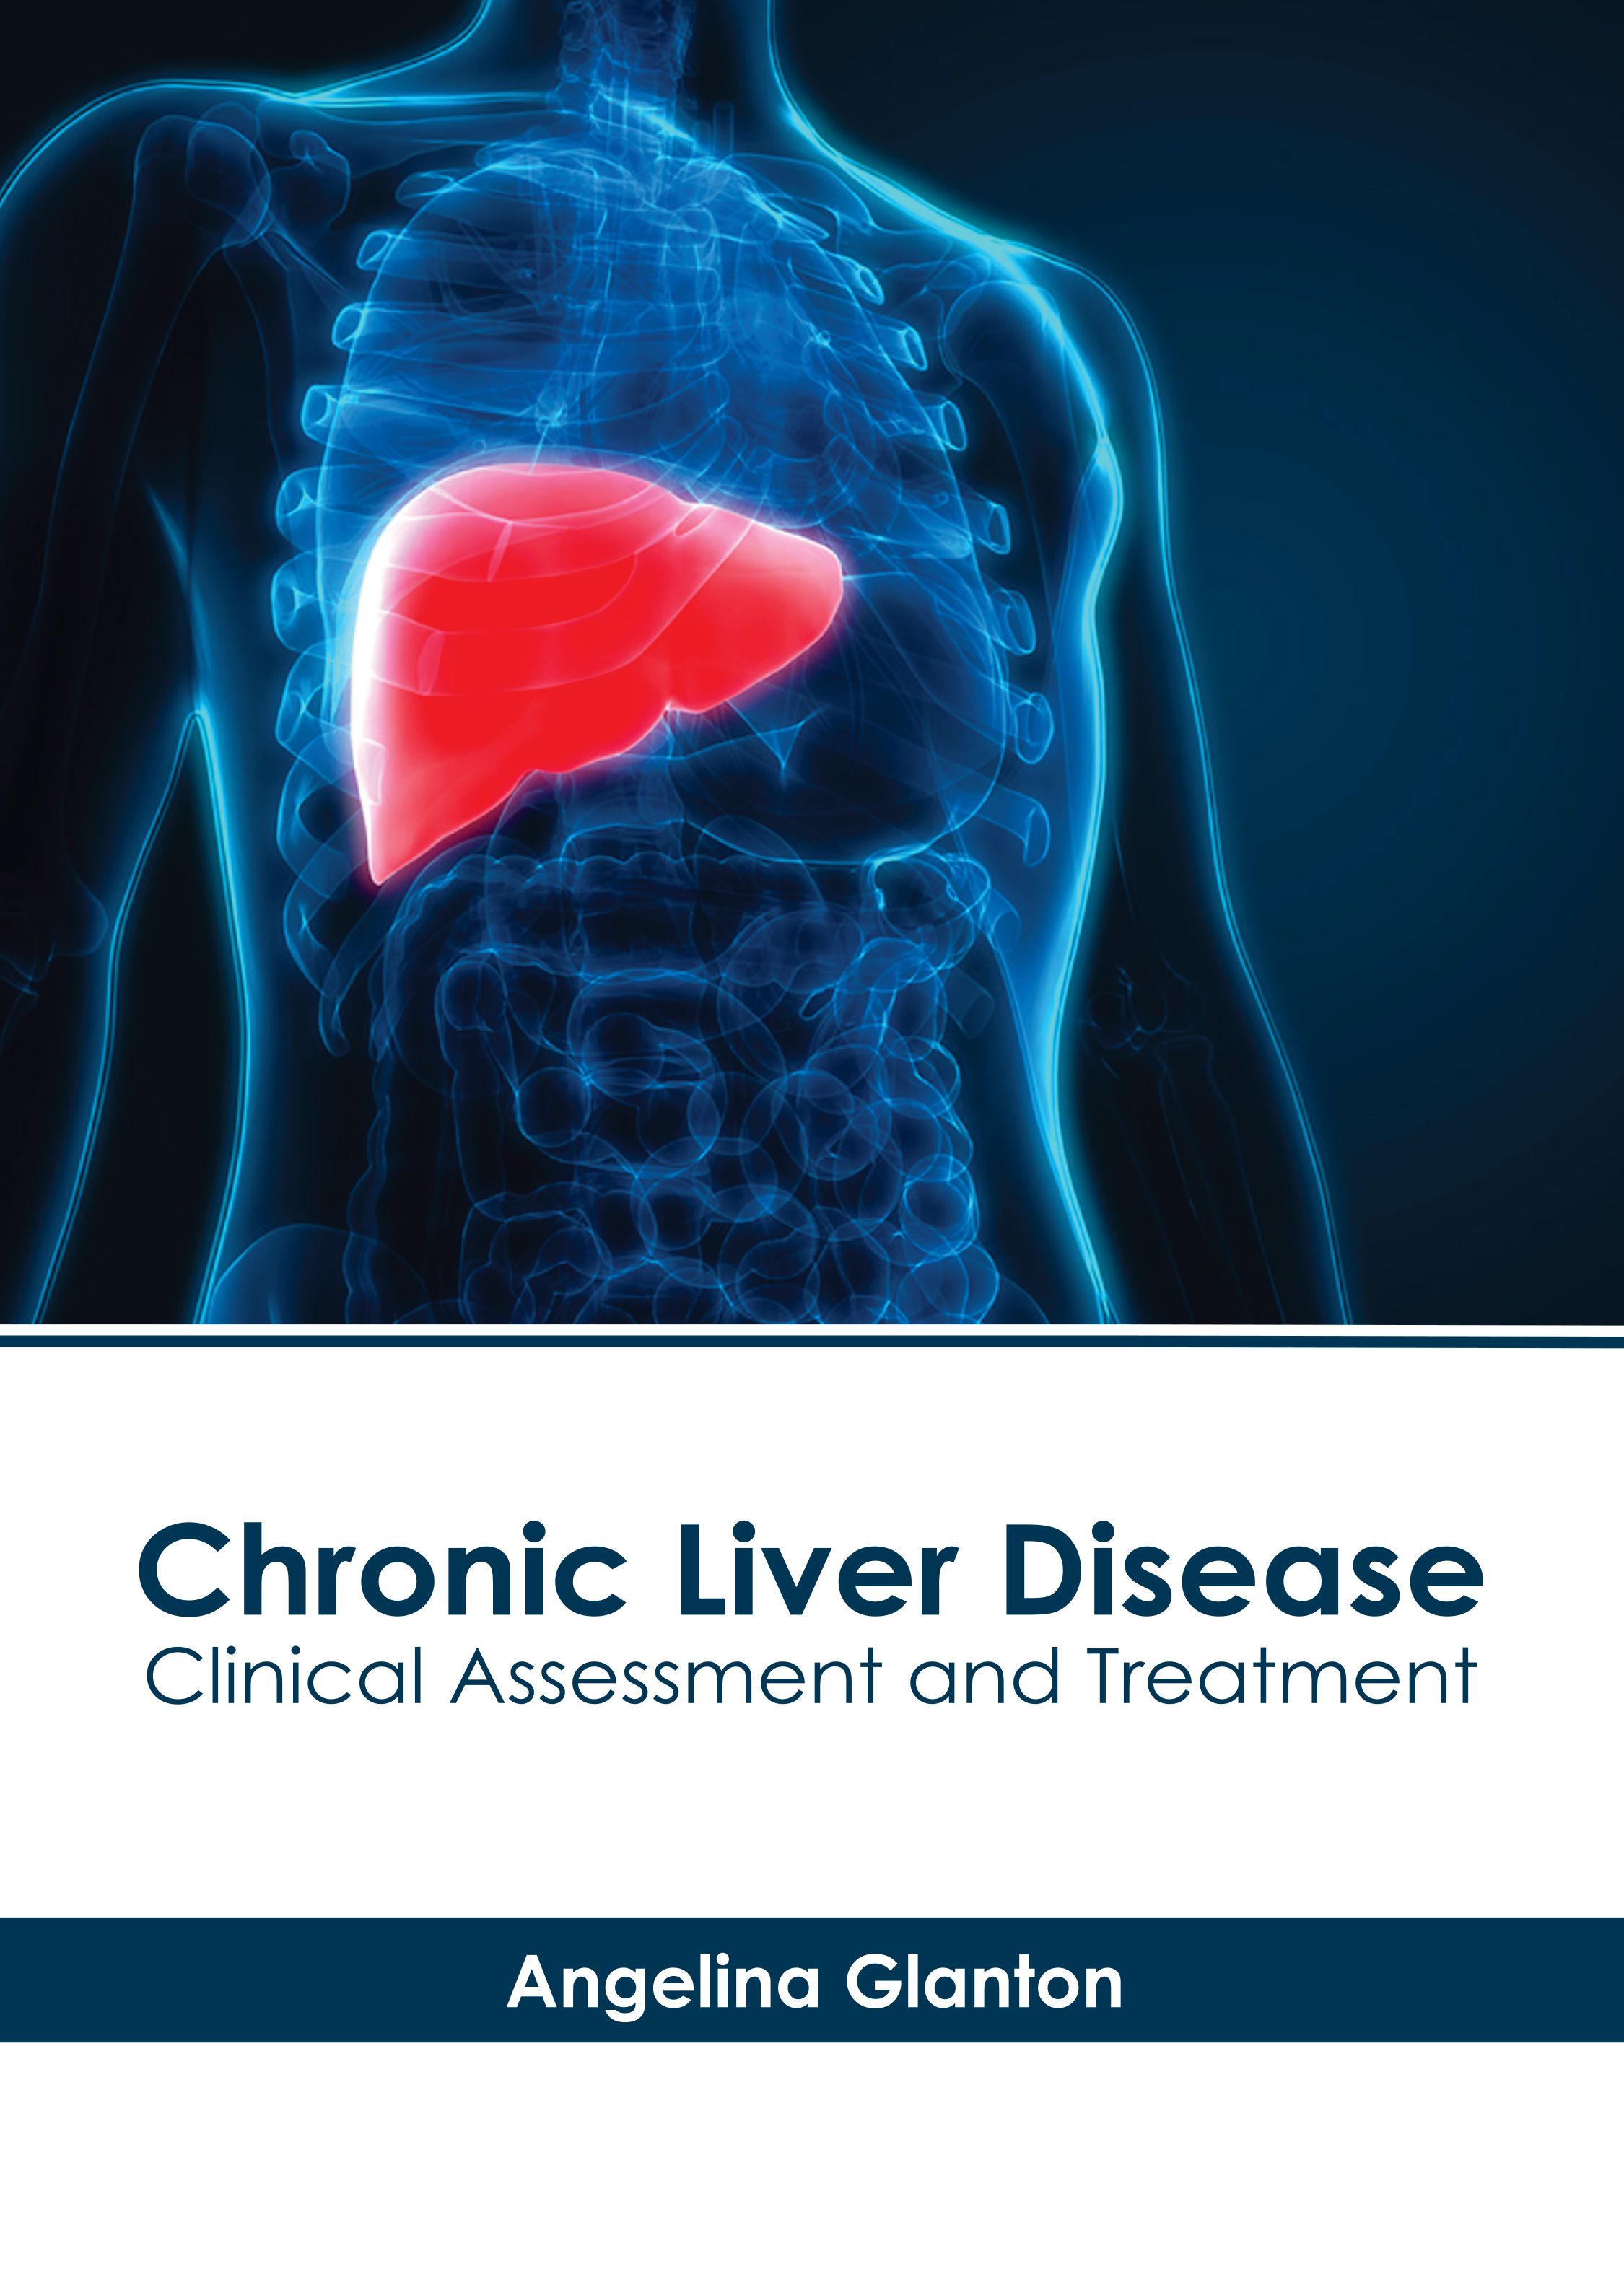 CHRONIC LIVER DISEASE: CLINICAL ASSESSMENT AND TREATMENT